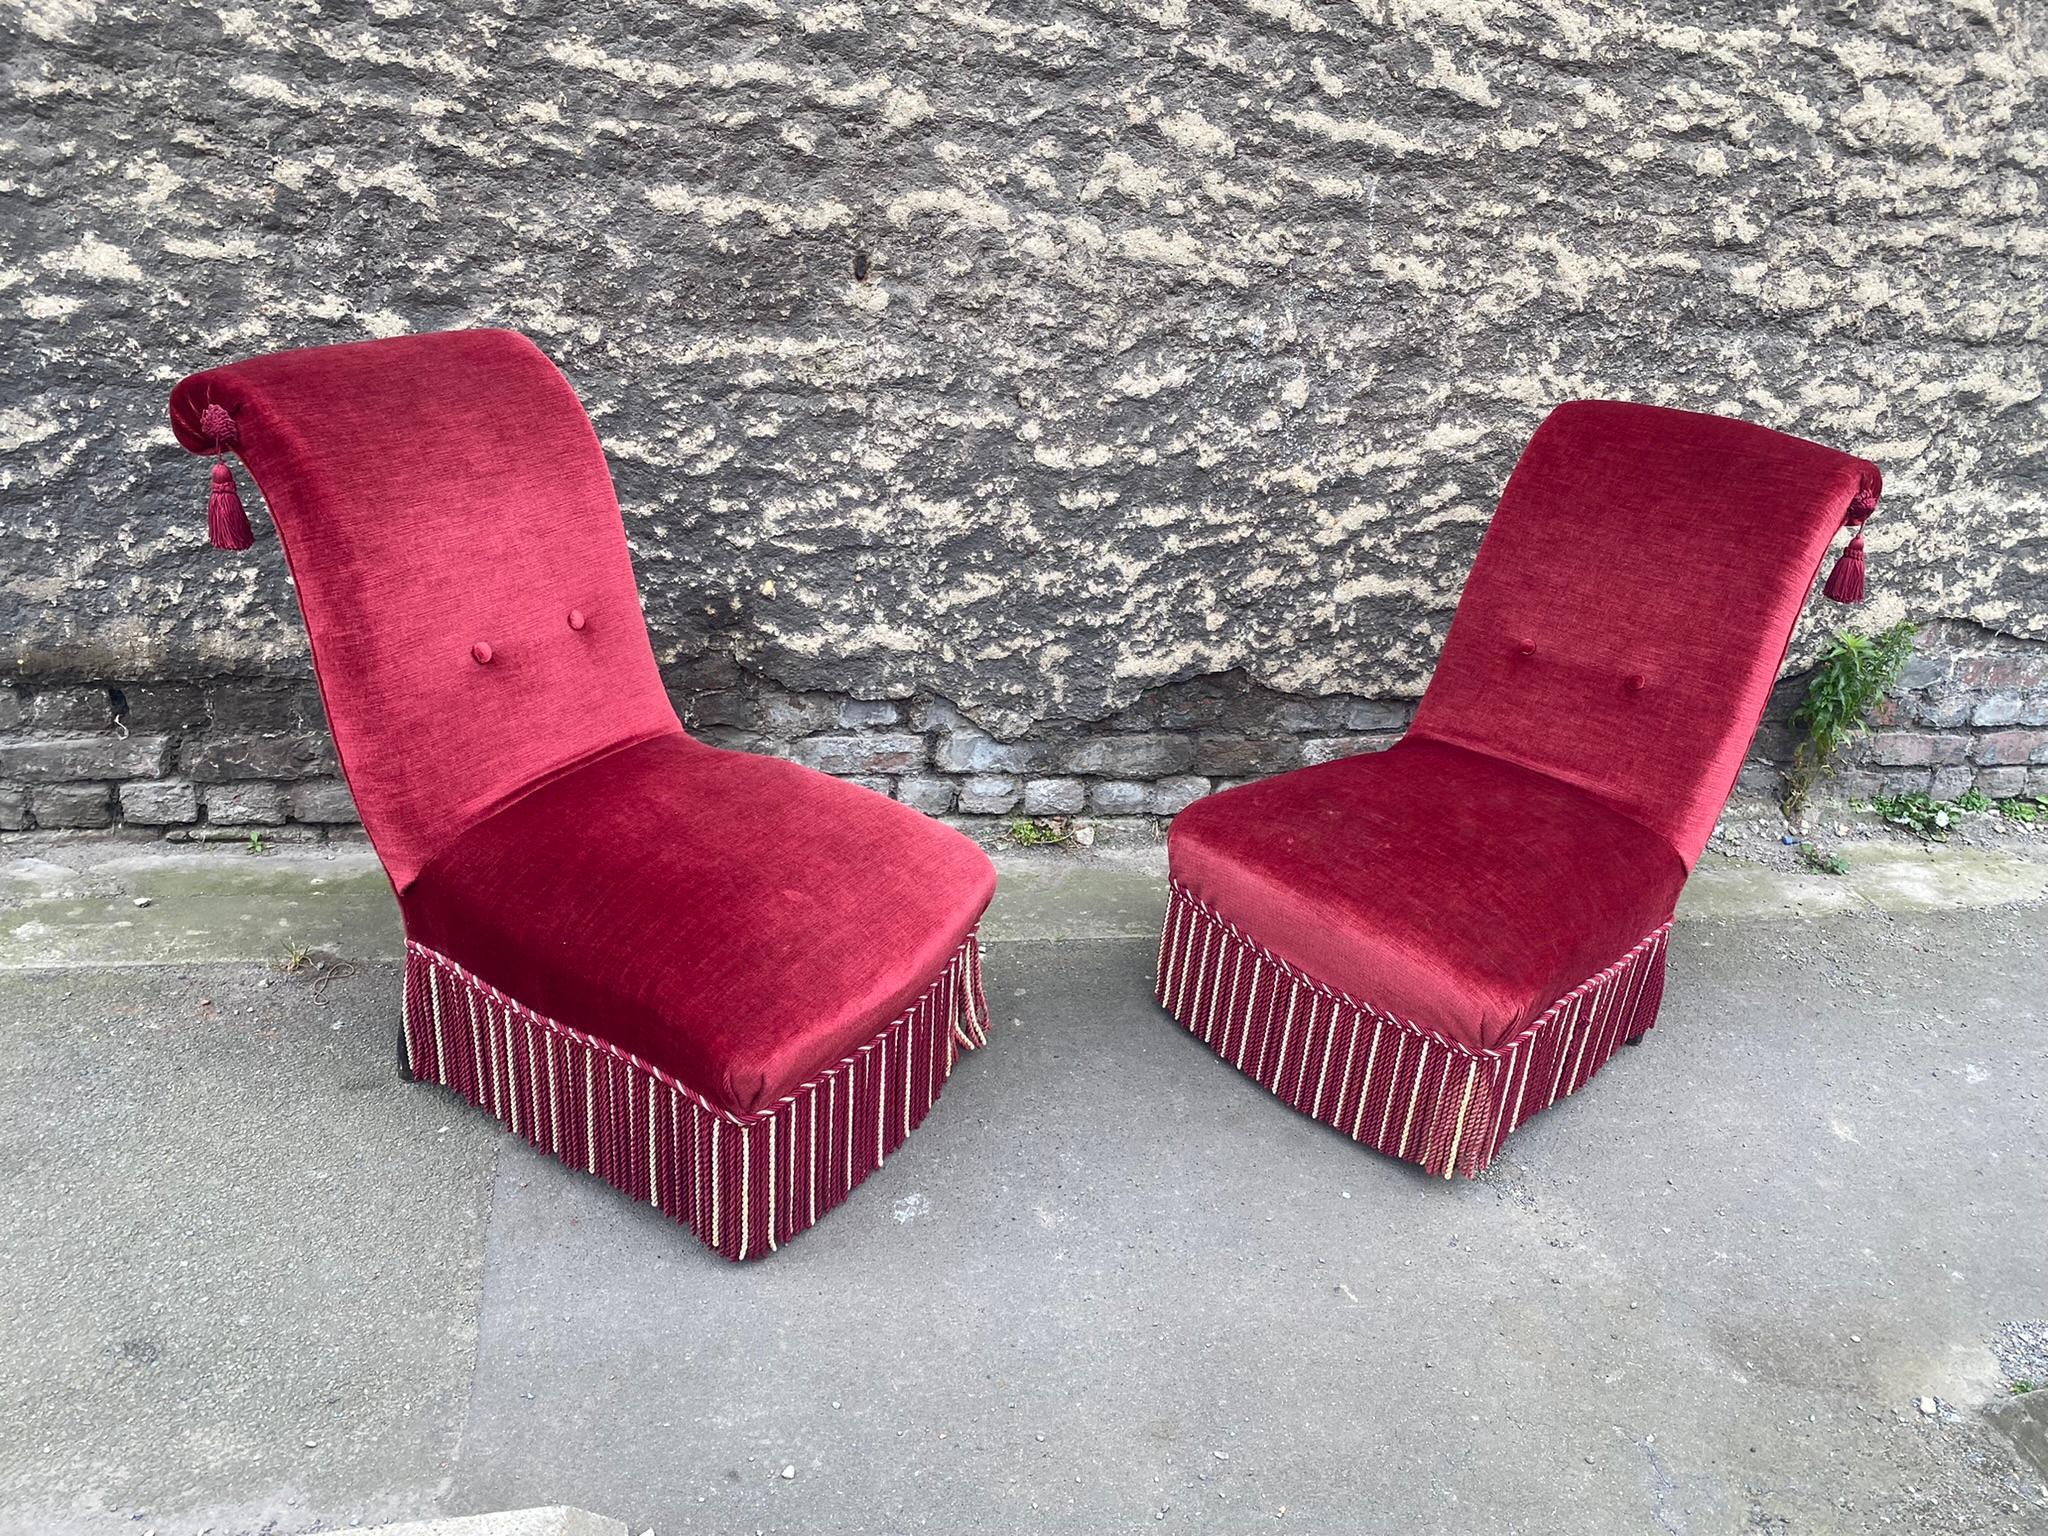 2 original Napoleon III low chairs, France, 1850s.
Price is for 1
2 are available